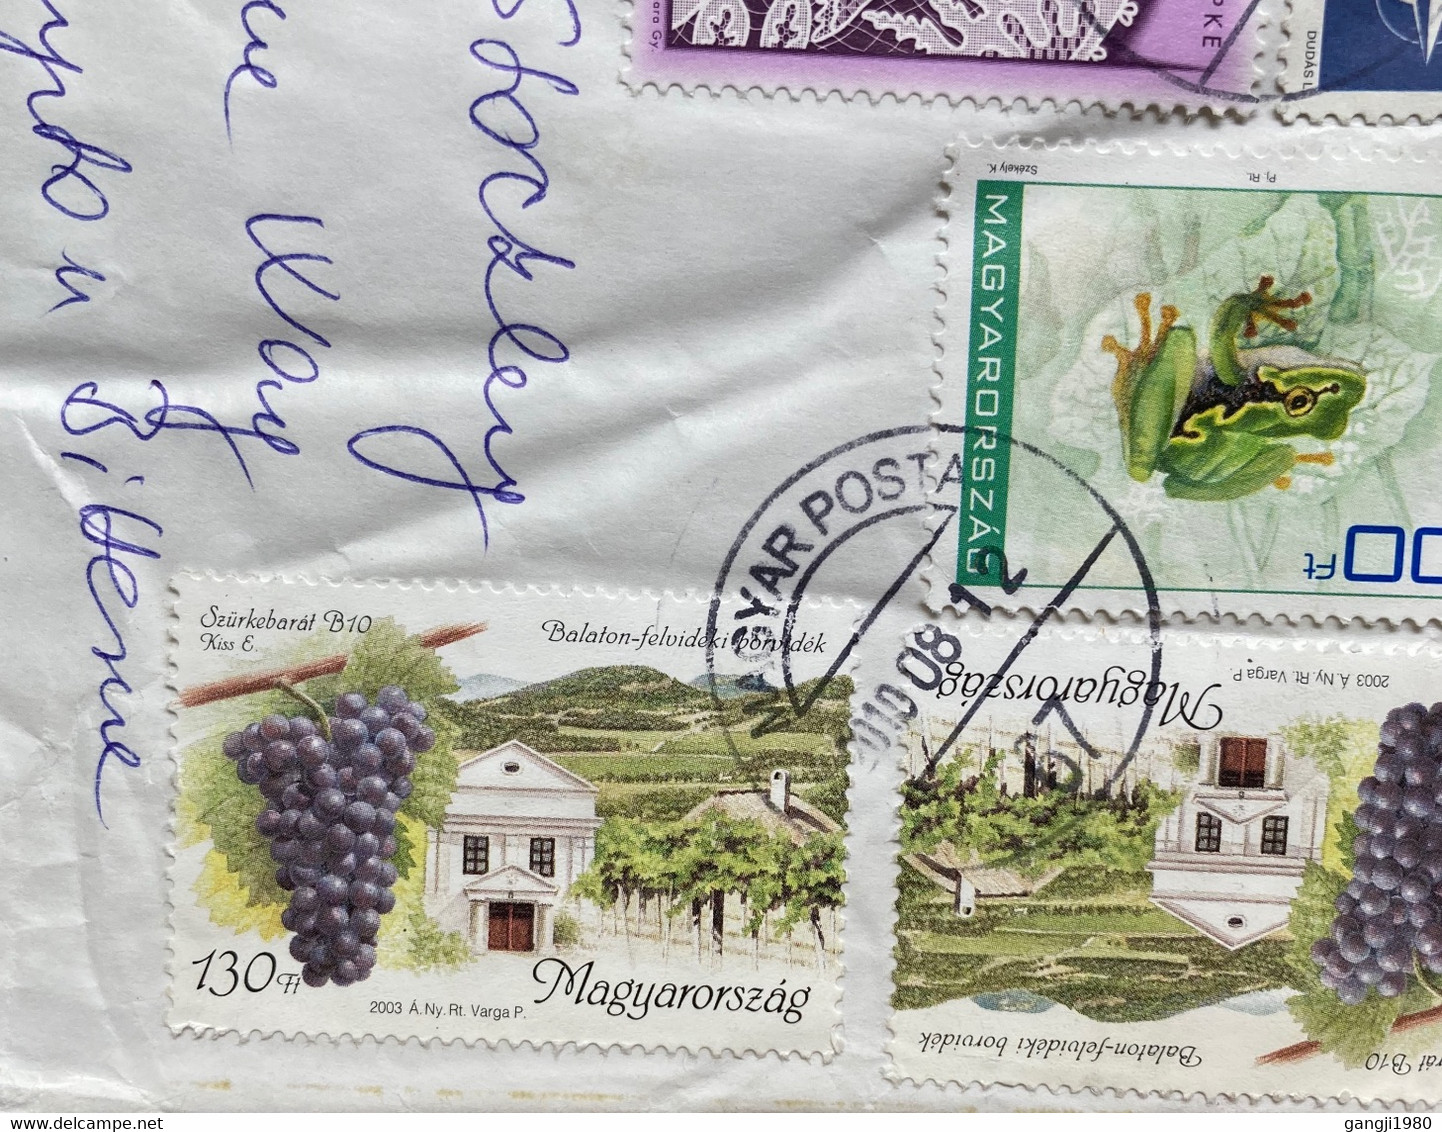 HUNGARY 2001-2002, COUPLE DANCE,FROG ,FISH ,RAILWAY,GRAPE ,EUROPA, MAP, NATURE,BUILDING,11 REGISTERED STAMPS USED !!! CO - Storia Postale